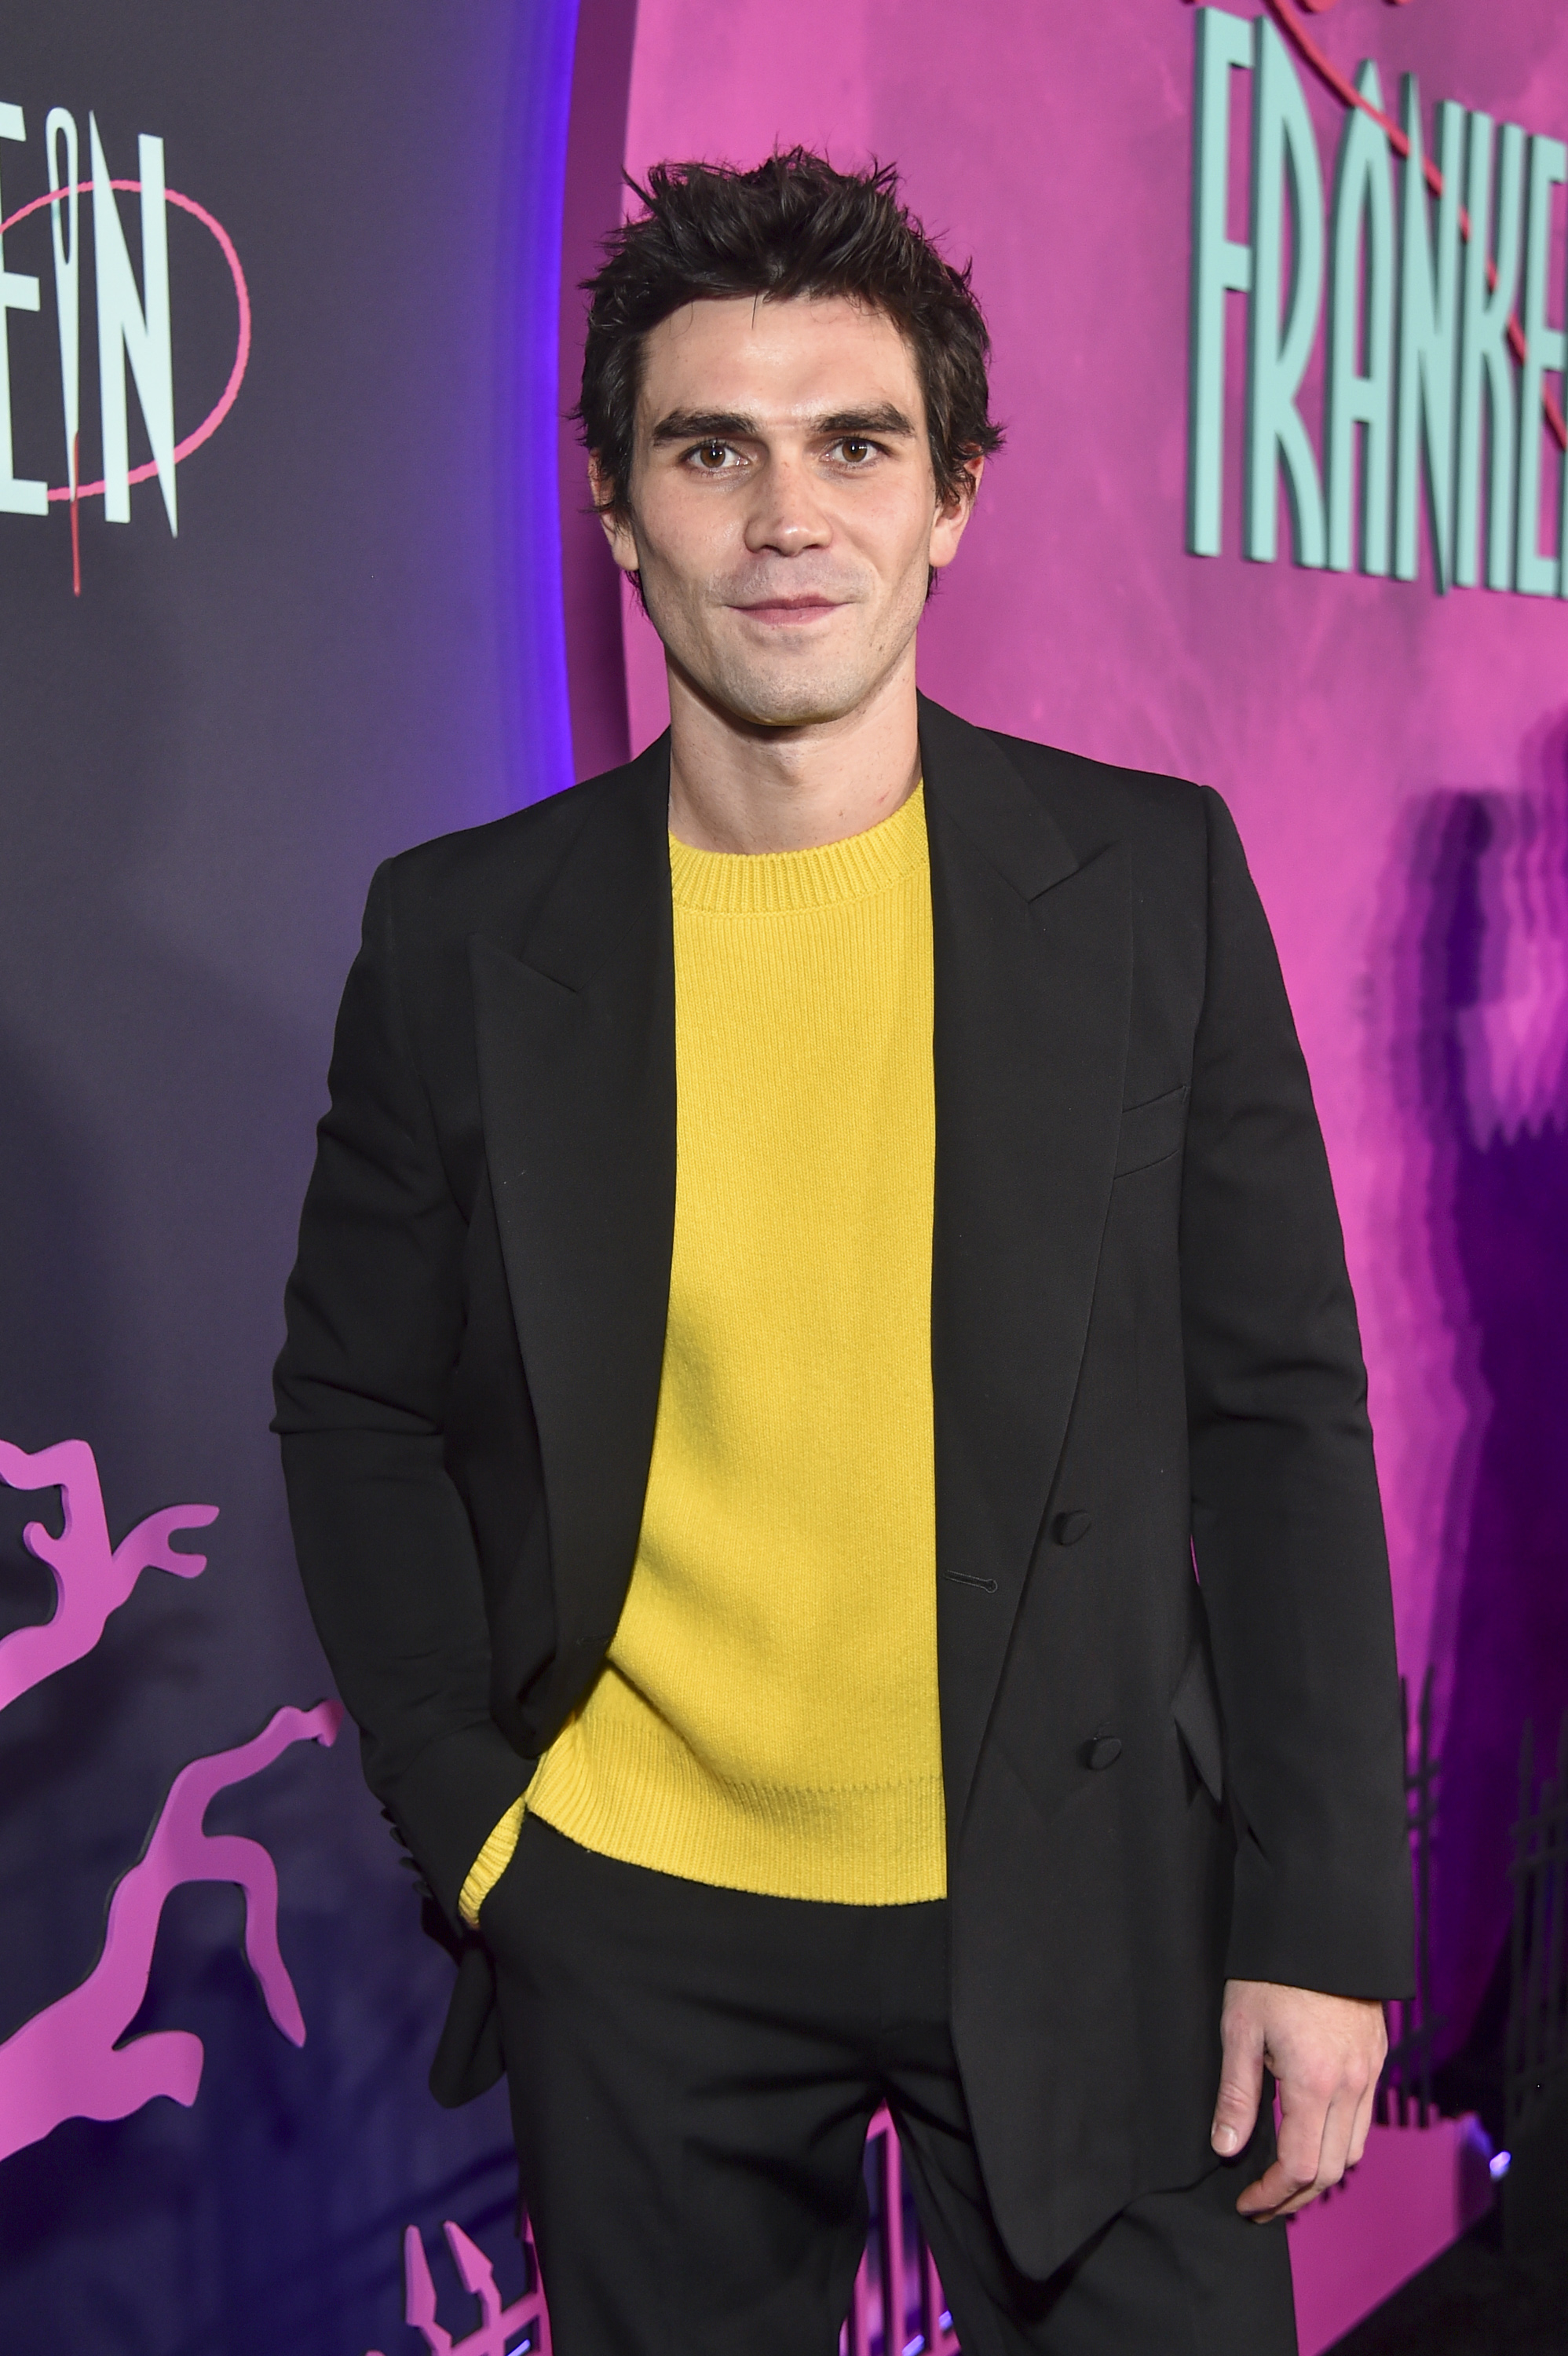 KJ Apa in a black blazer over yellow sweater poses against promotional backdrop